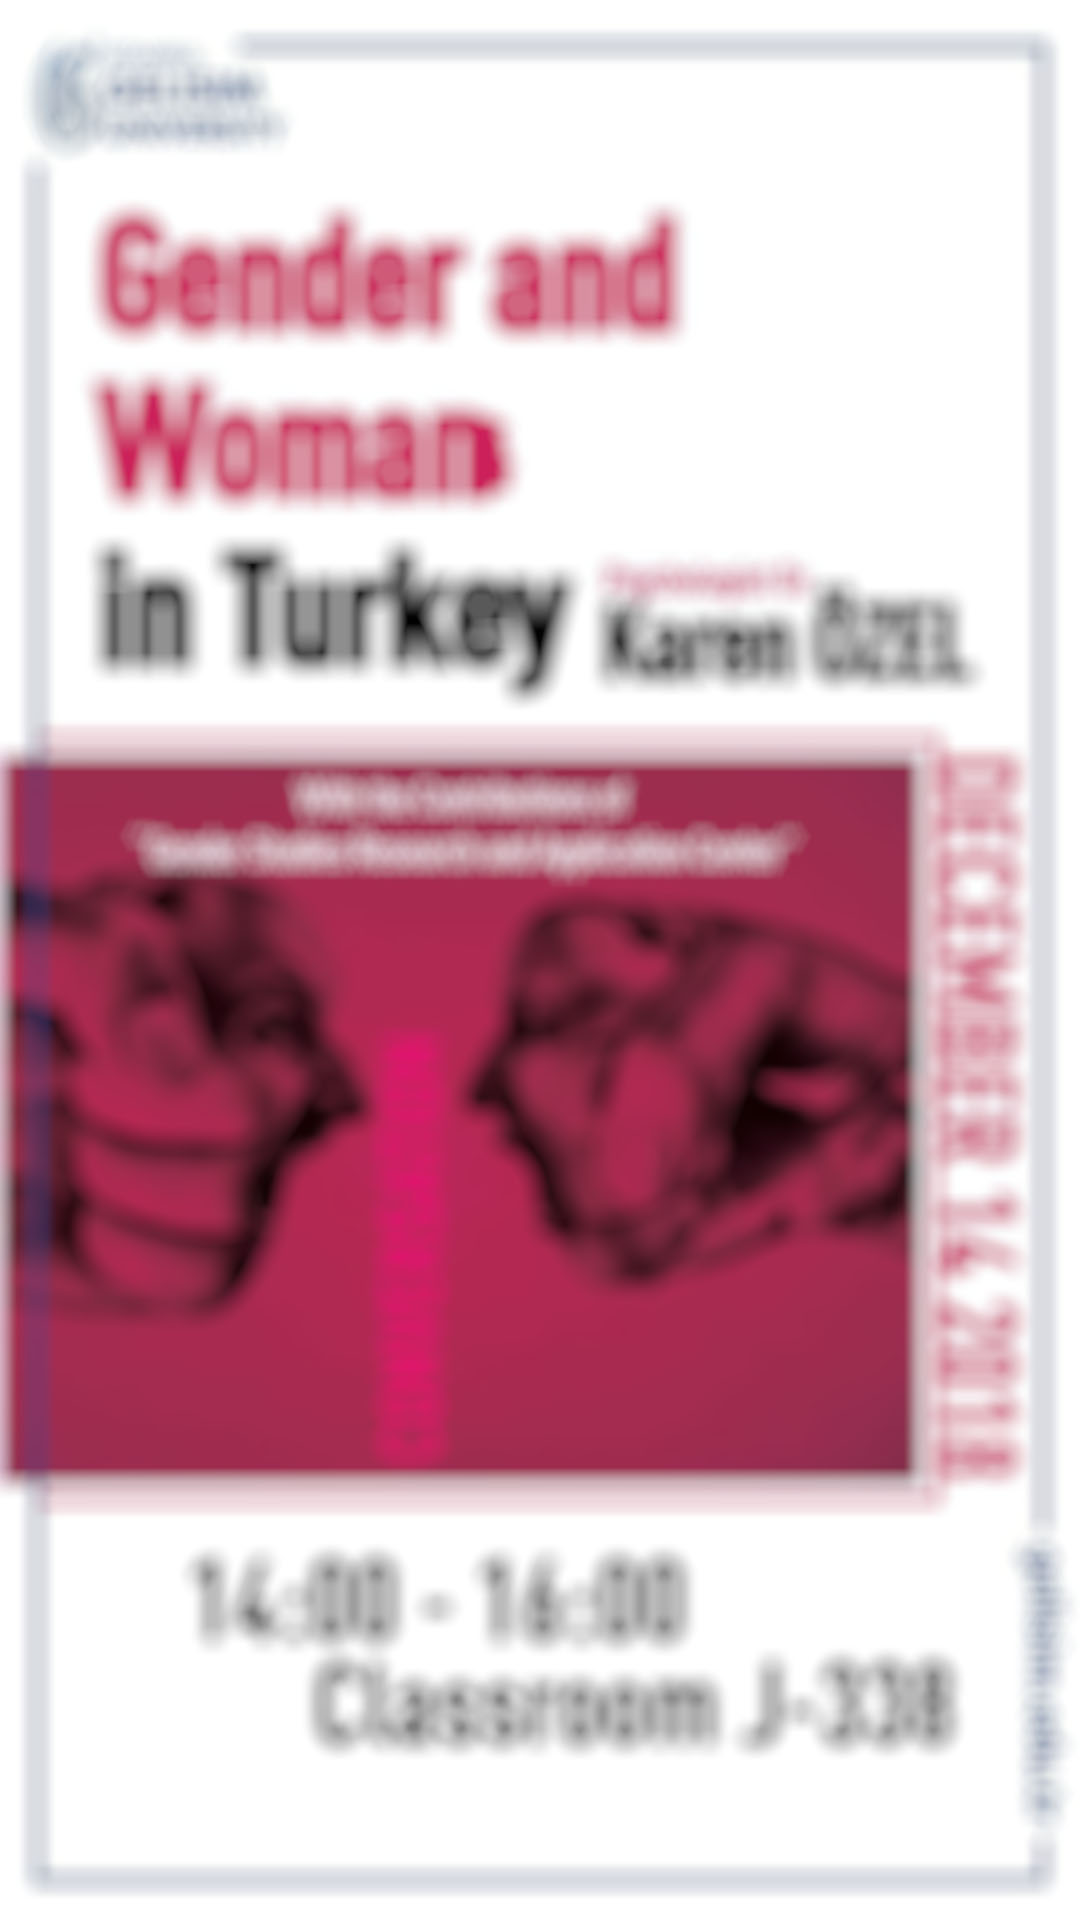 Gender and Woman in Turkey